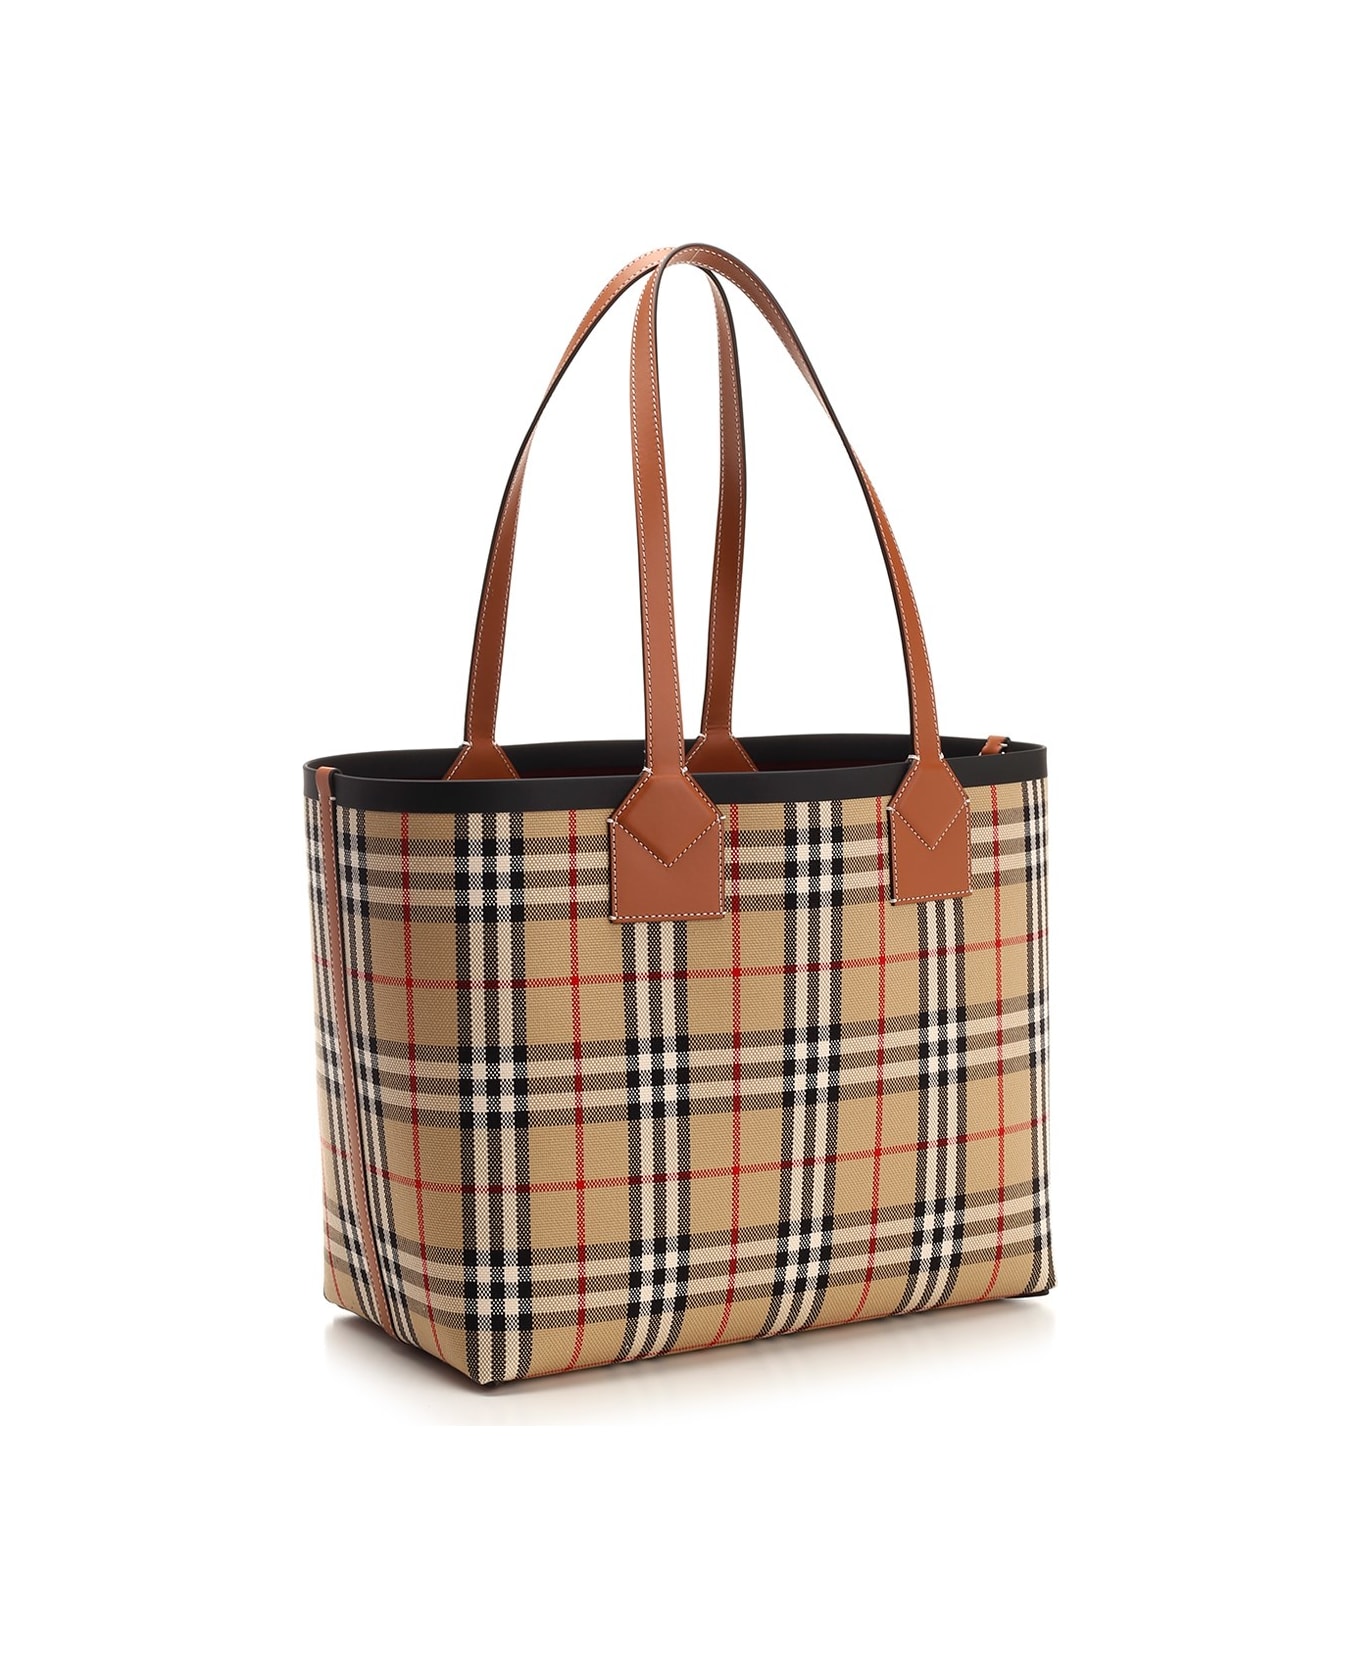 Burberry 'london' Small Tote Bag - Beige